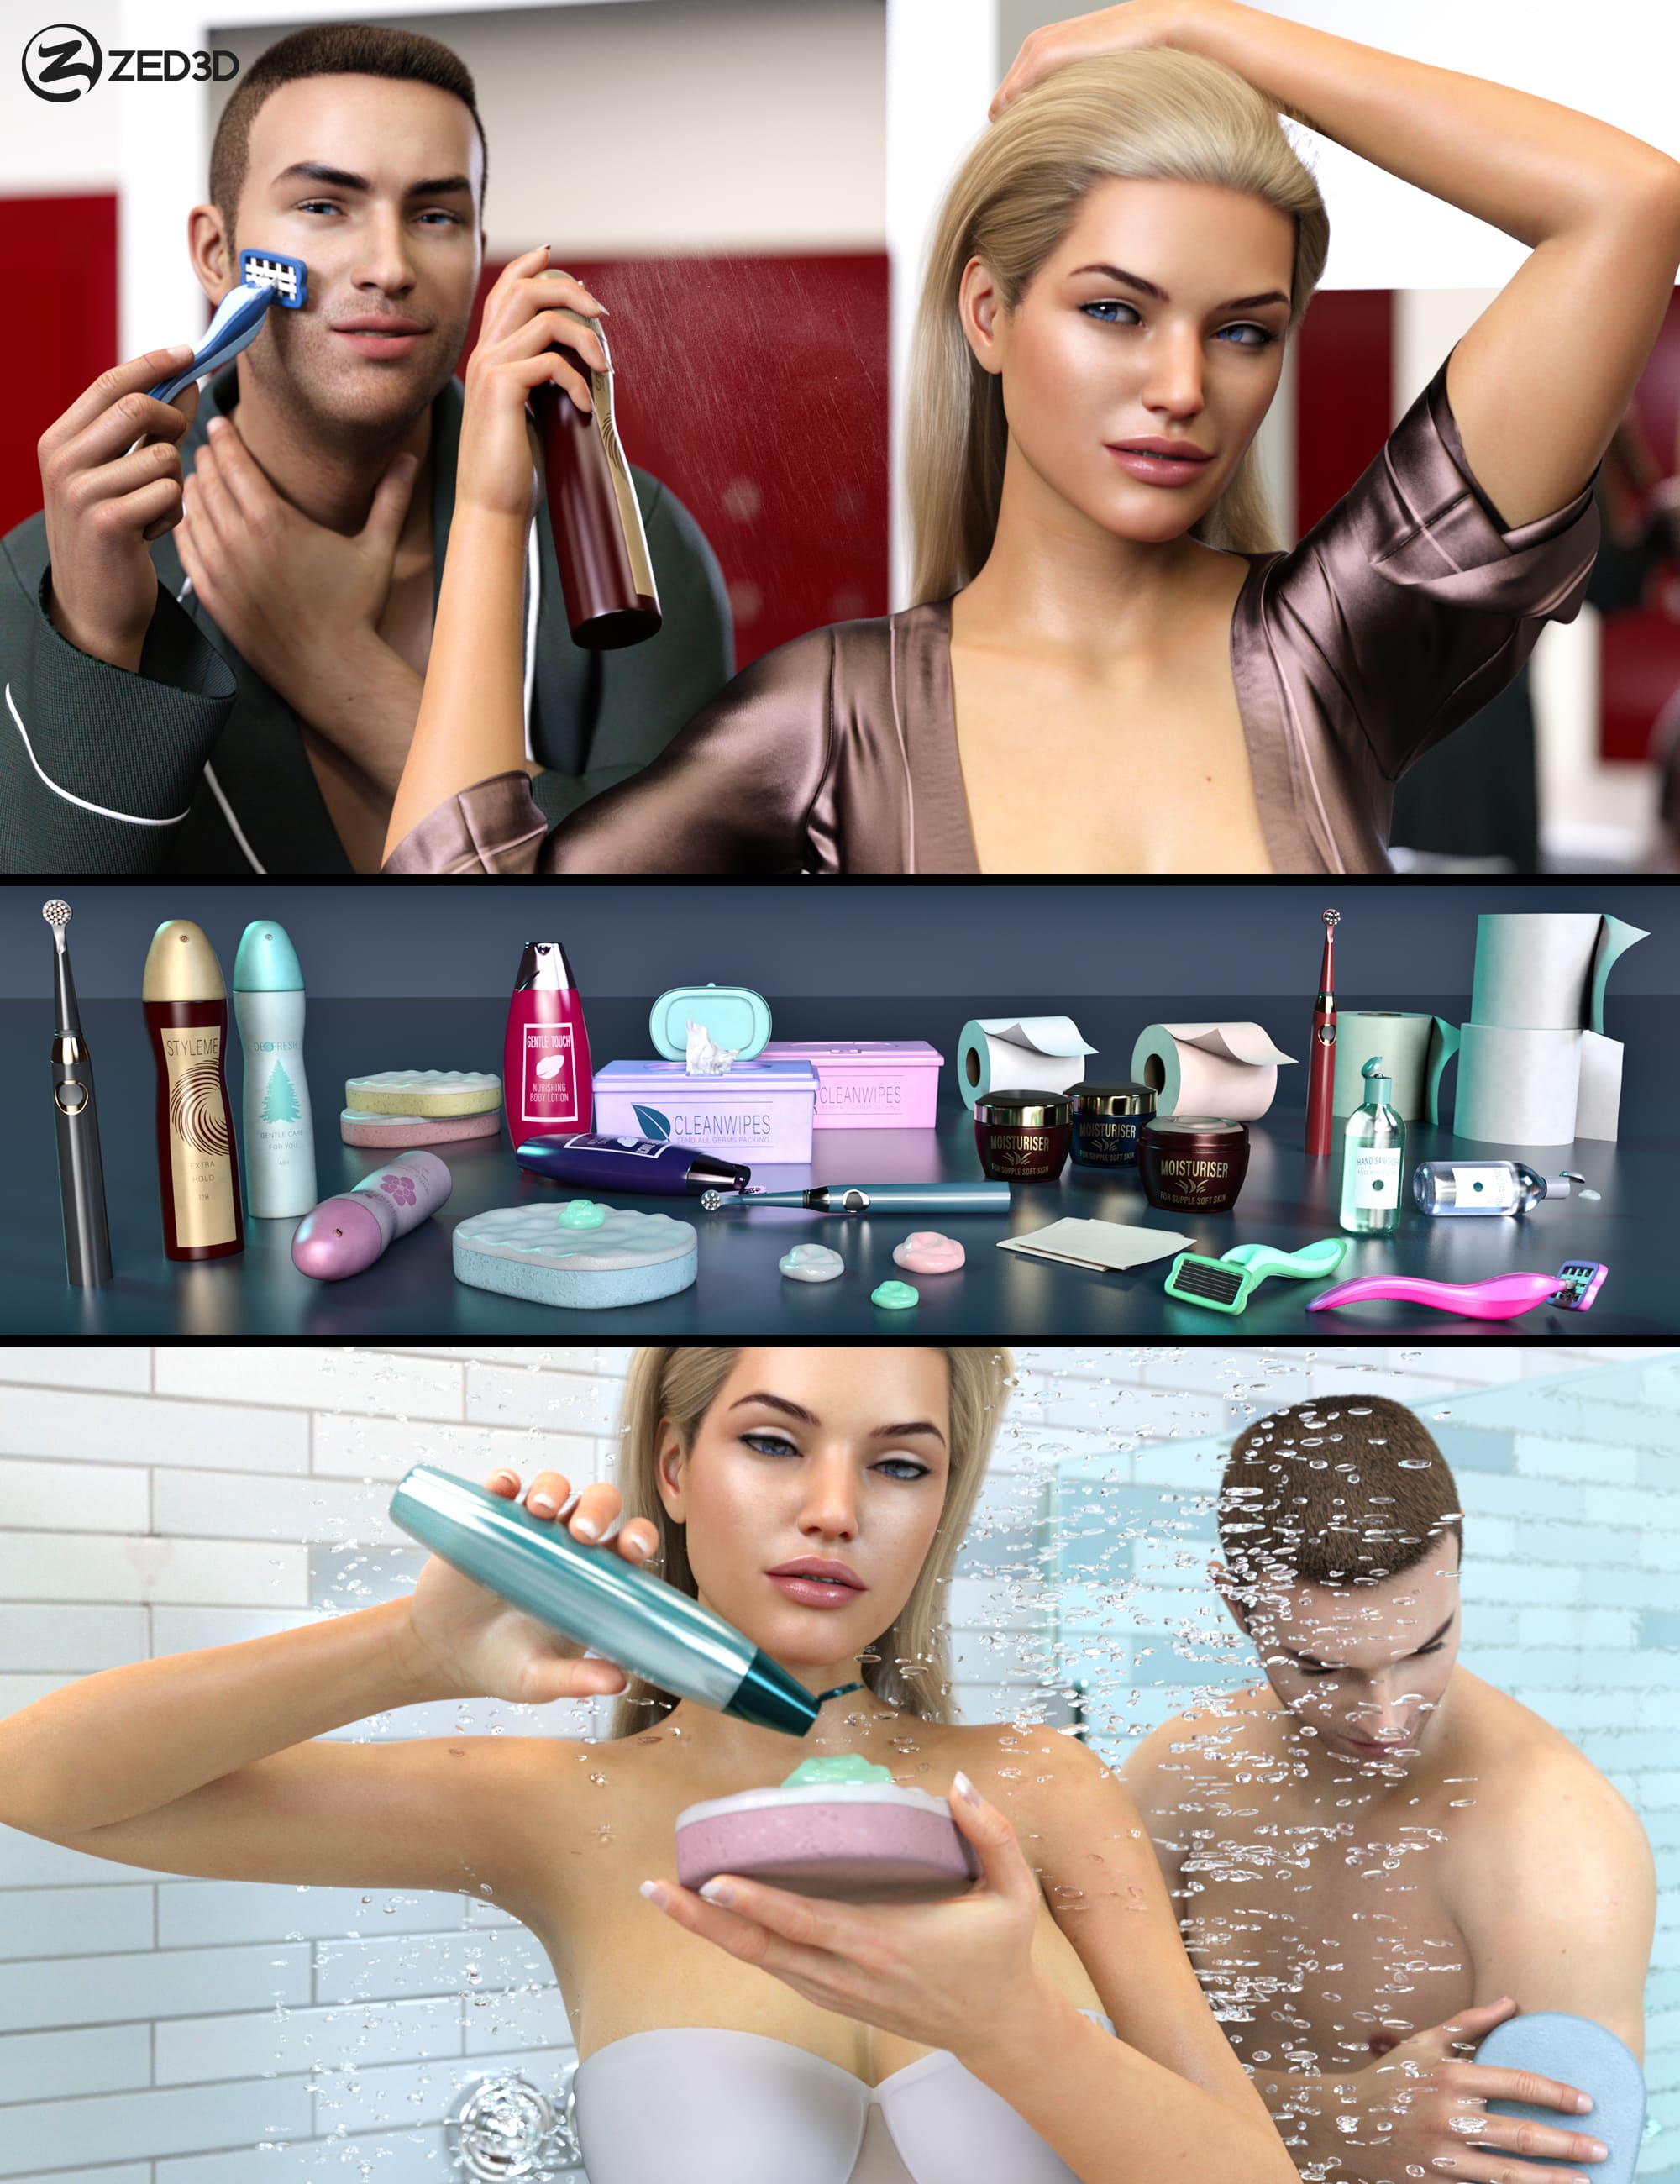 Z Personal Hygiene Props and Poses for Genesis 8 and 8.1_DAZ3DDL